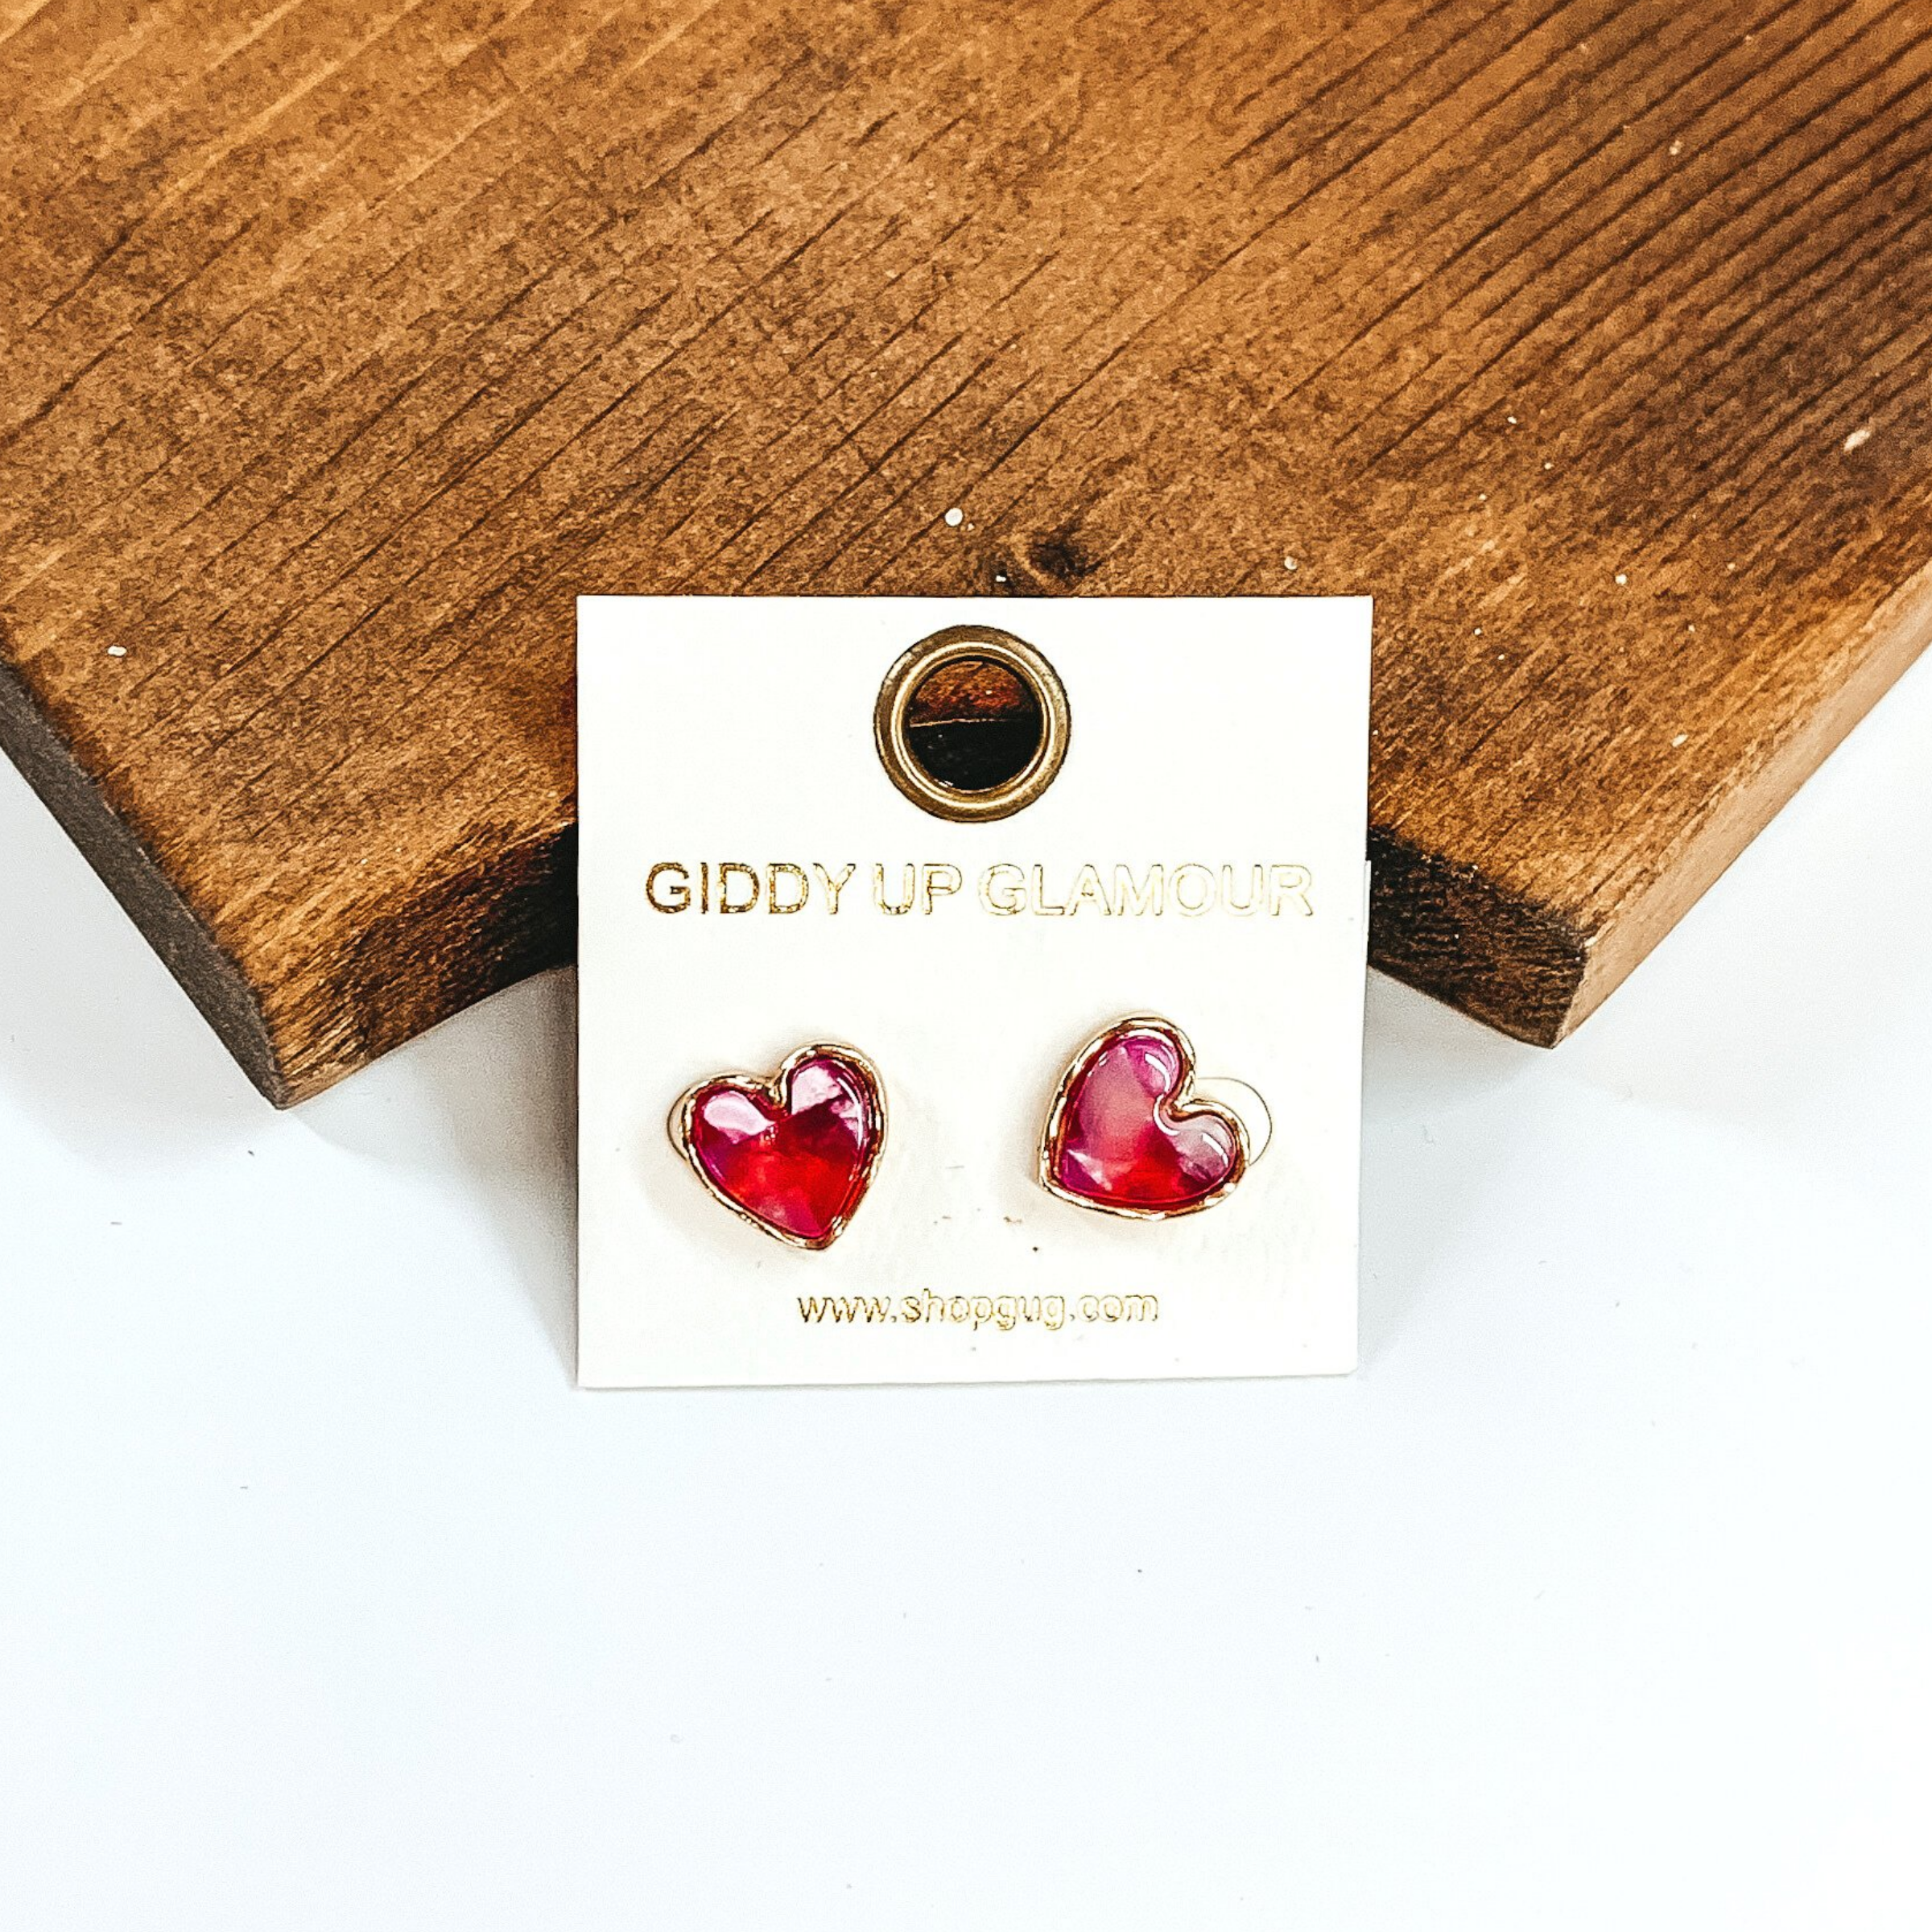 These are heart shaped stud earrings. It has a mix of red, pink, purple, and white on the earrings with a gold outline. These earrings are pictured on a white earrings holder that is laying in front of a piece of wood on a white background.